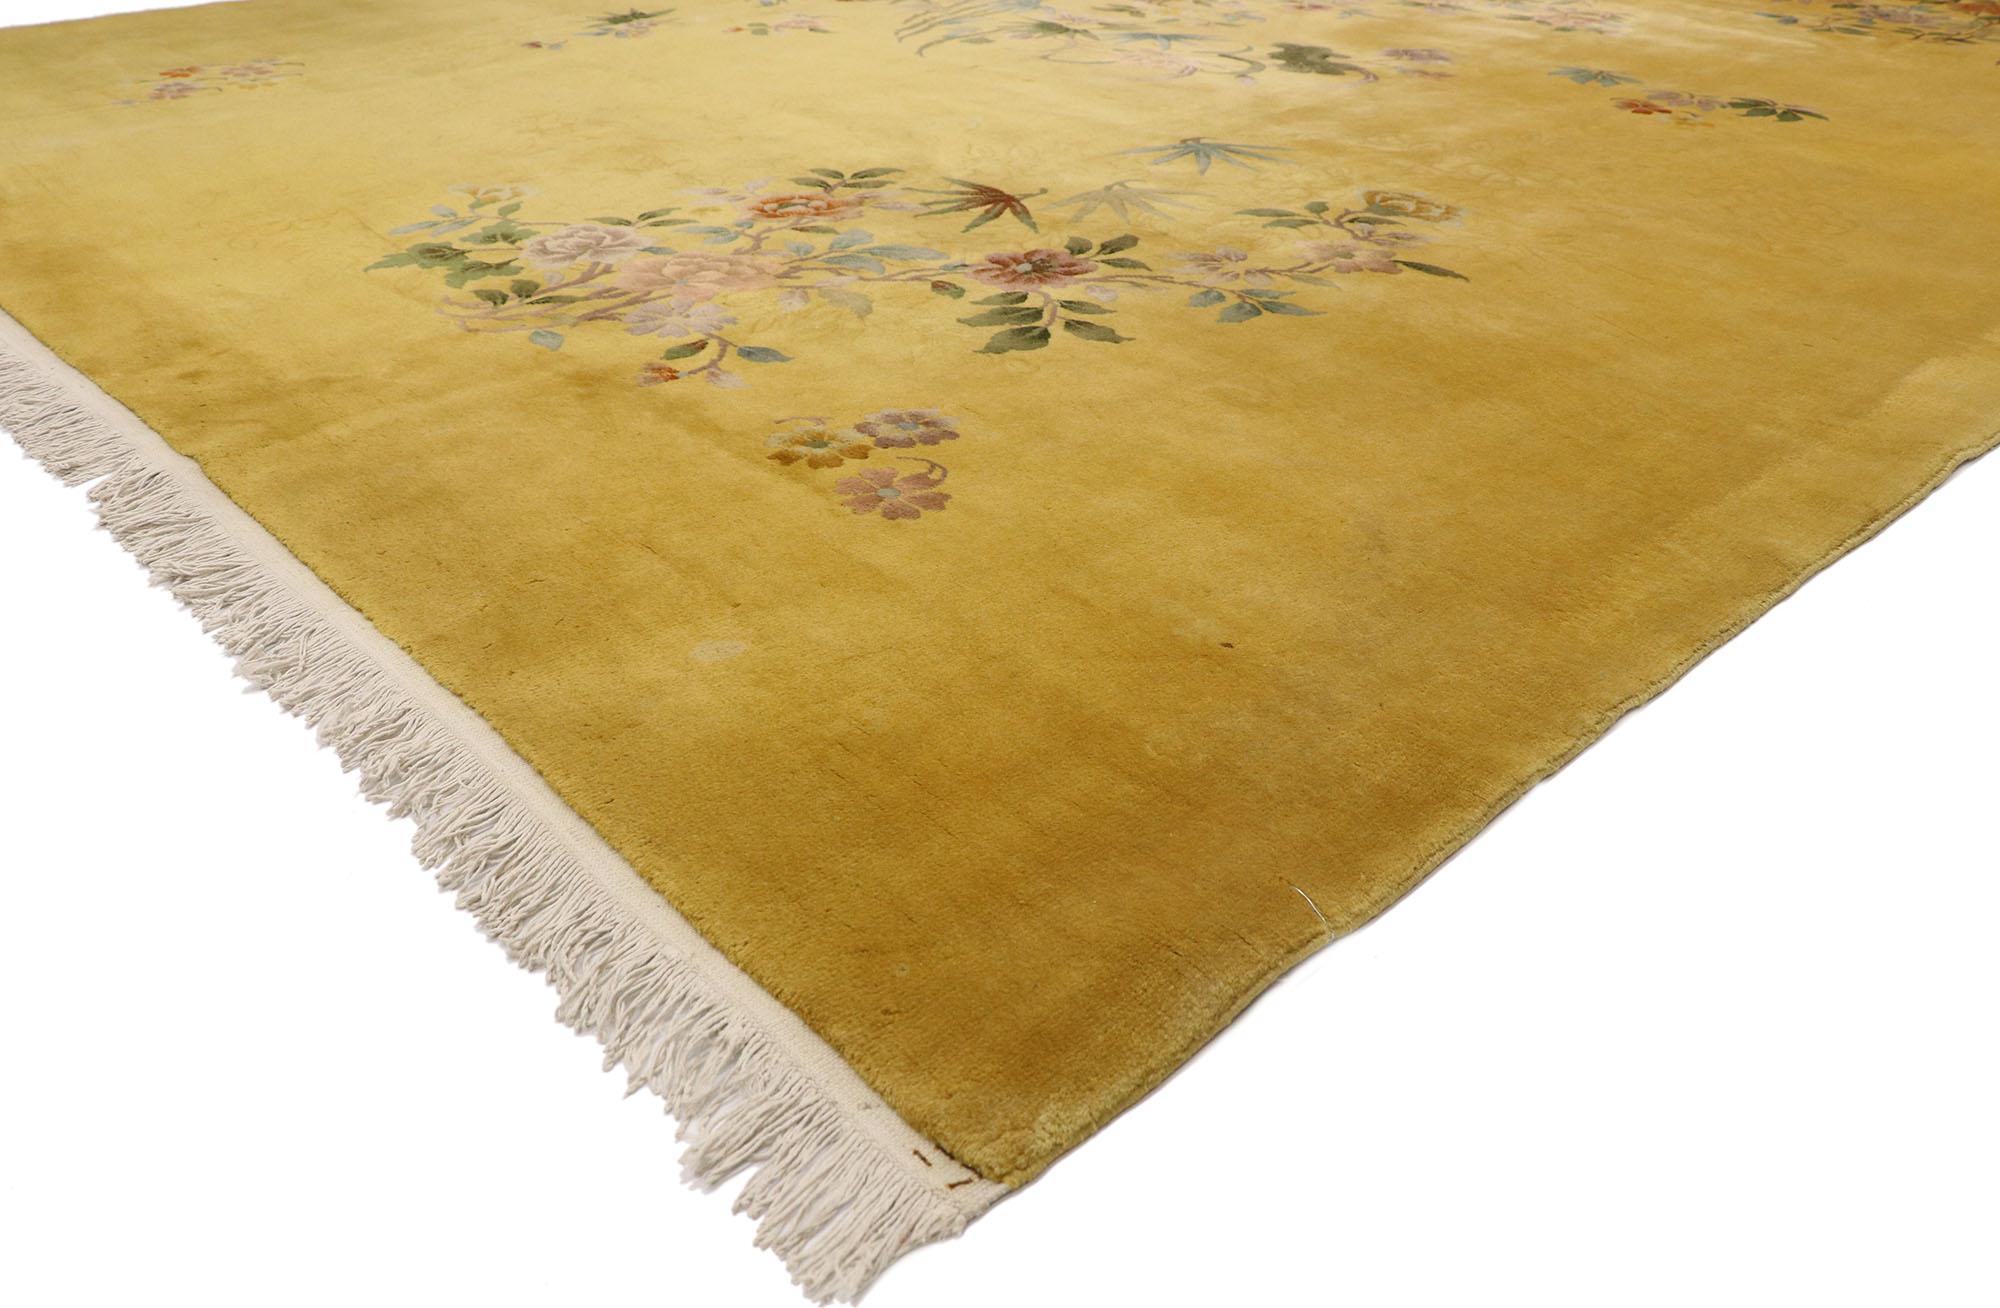 77391, early 20th century antique gold Chinese Art Deco rug inspired by Walter Nichols. This hand knotted wool antique Chinese Art Deco rug features asymmetrical arrangements of Peony flowers, plum blossoms, tantalizing sprays of bamboo, and an